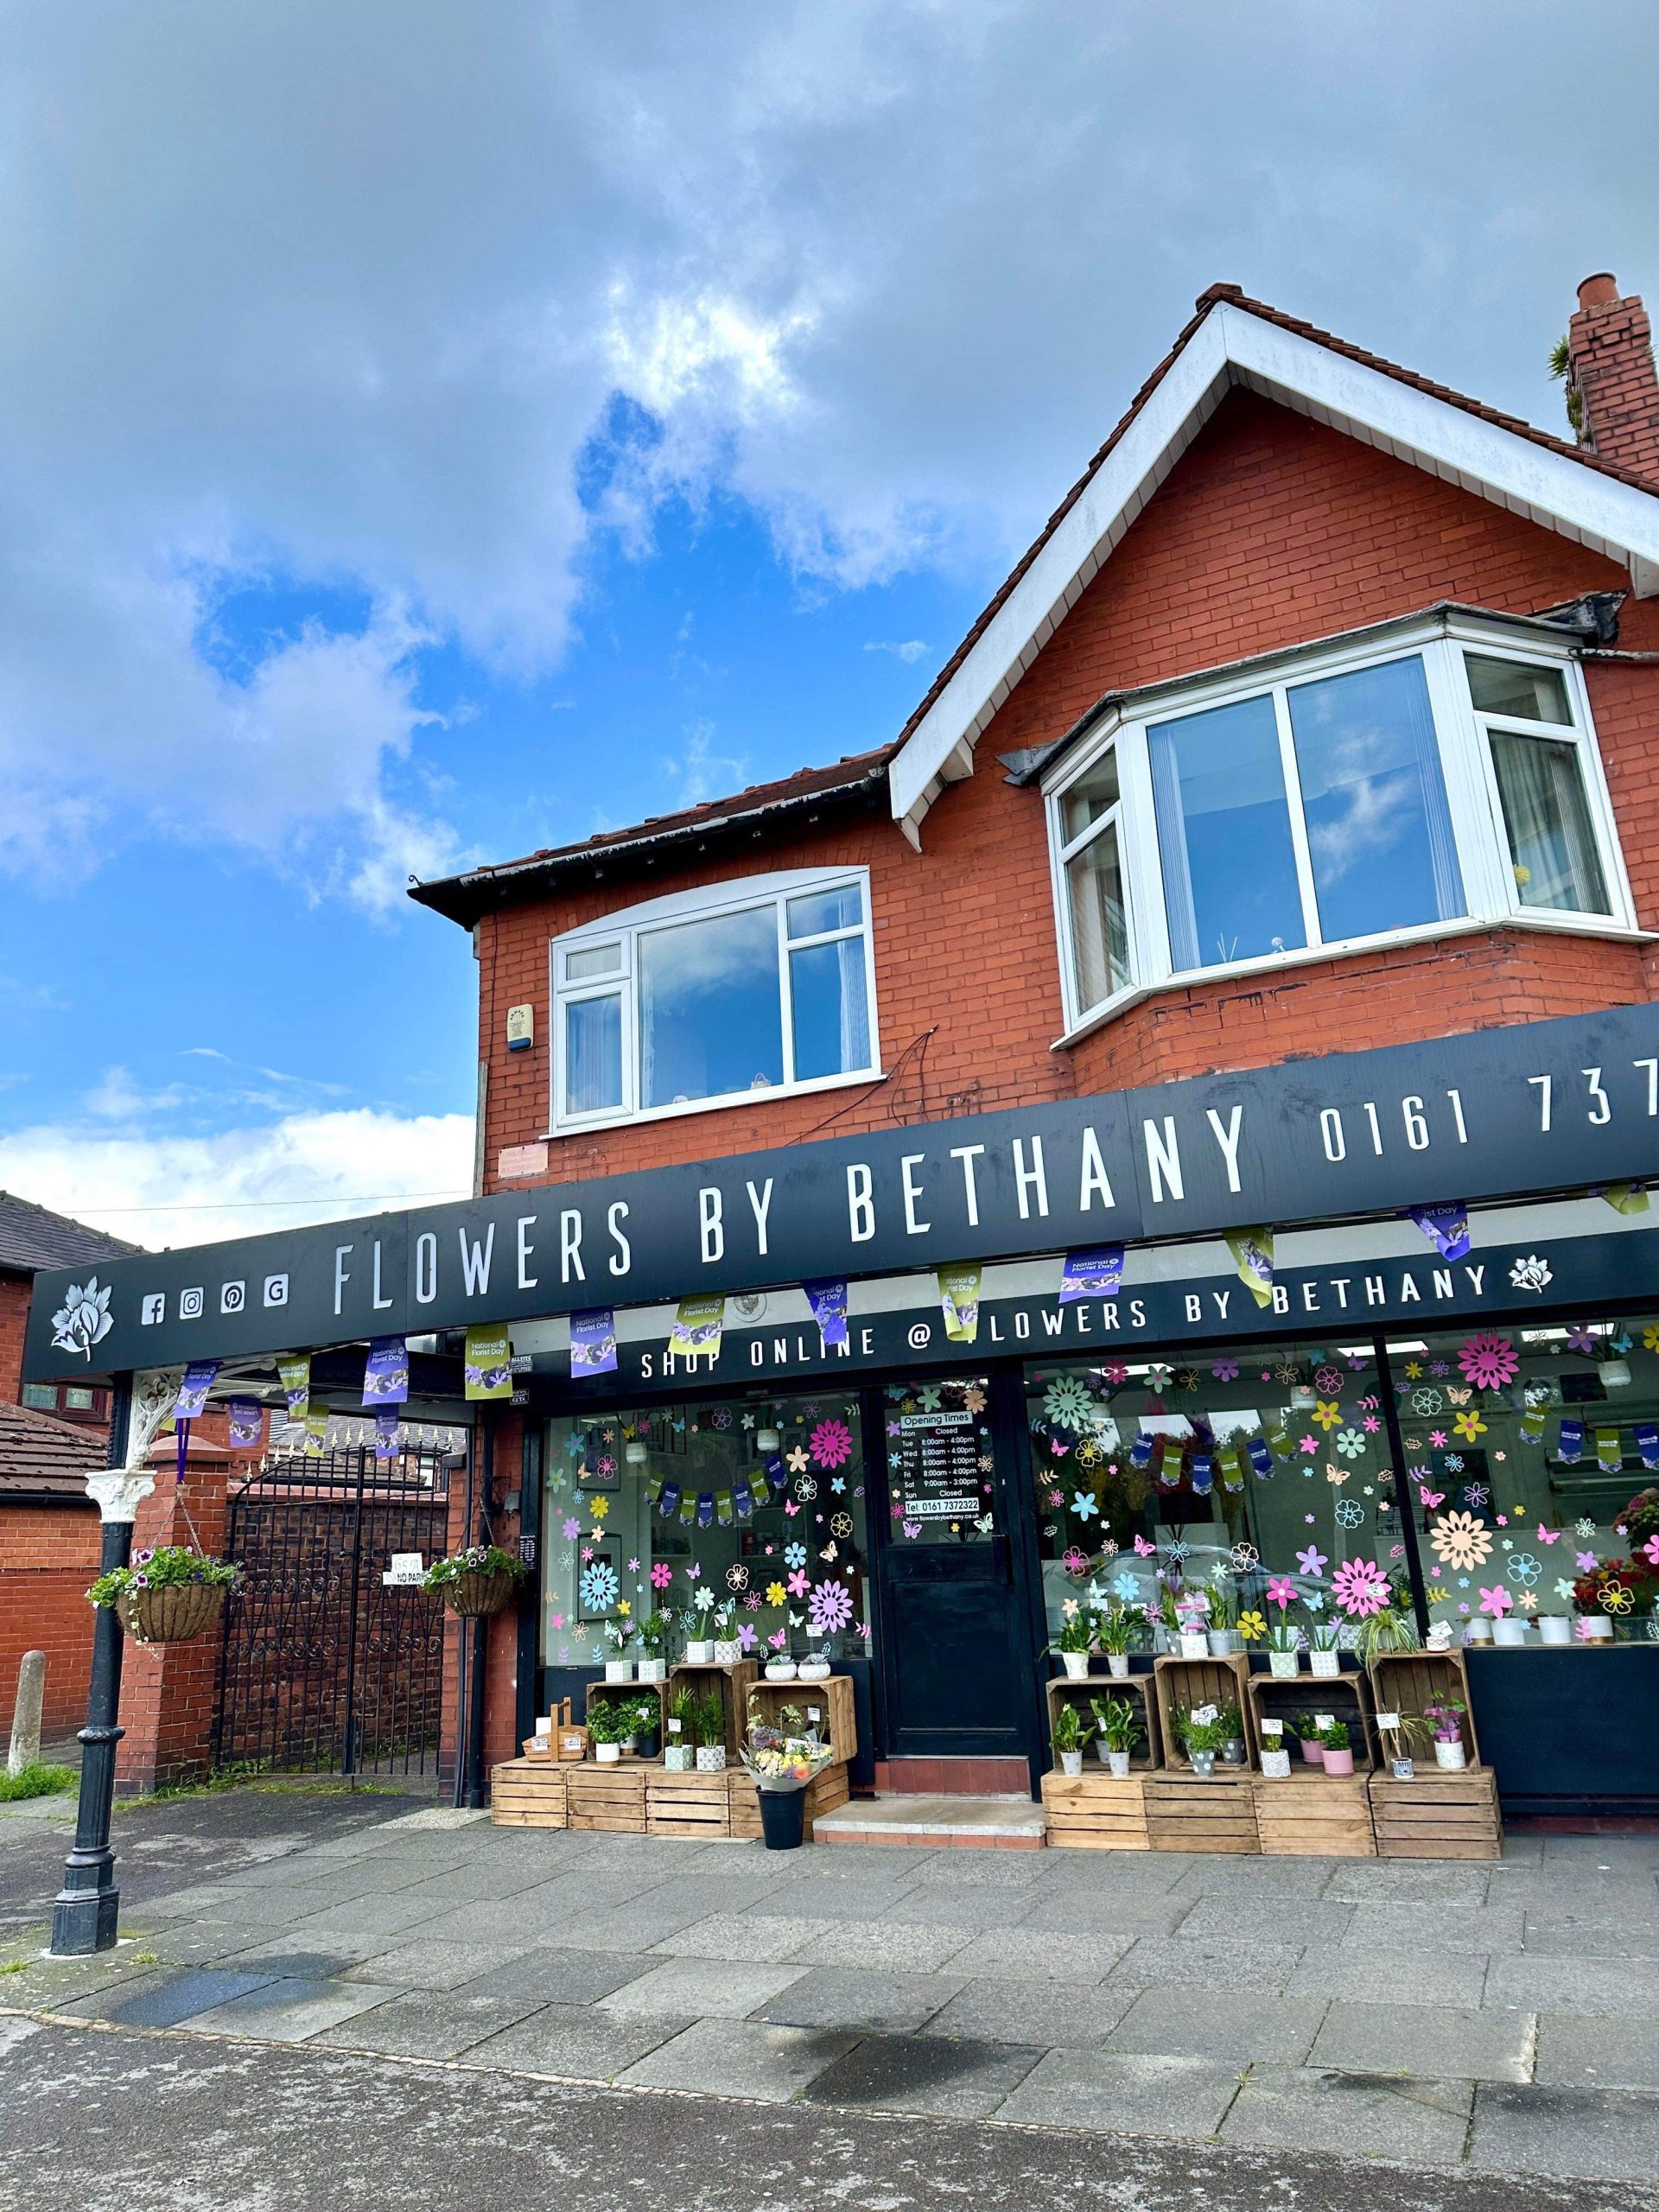 Swinton flower shop to celebrate the first National Florist Day